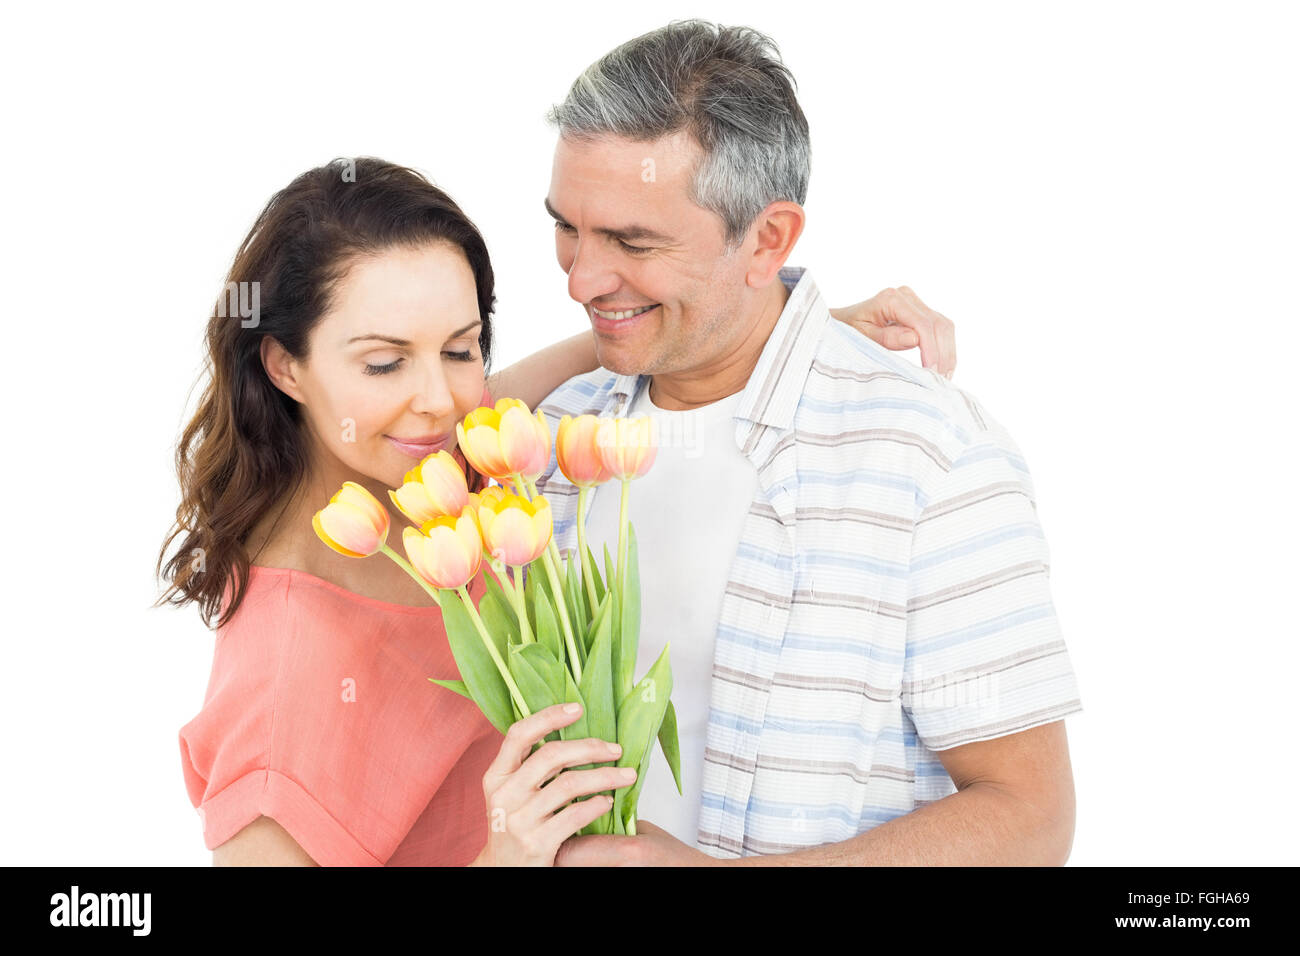 Smiling couple with flowers bouquet Stock Photo